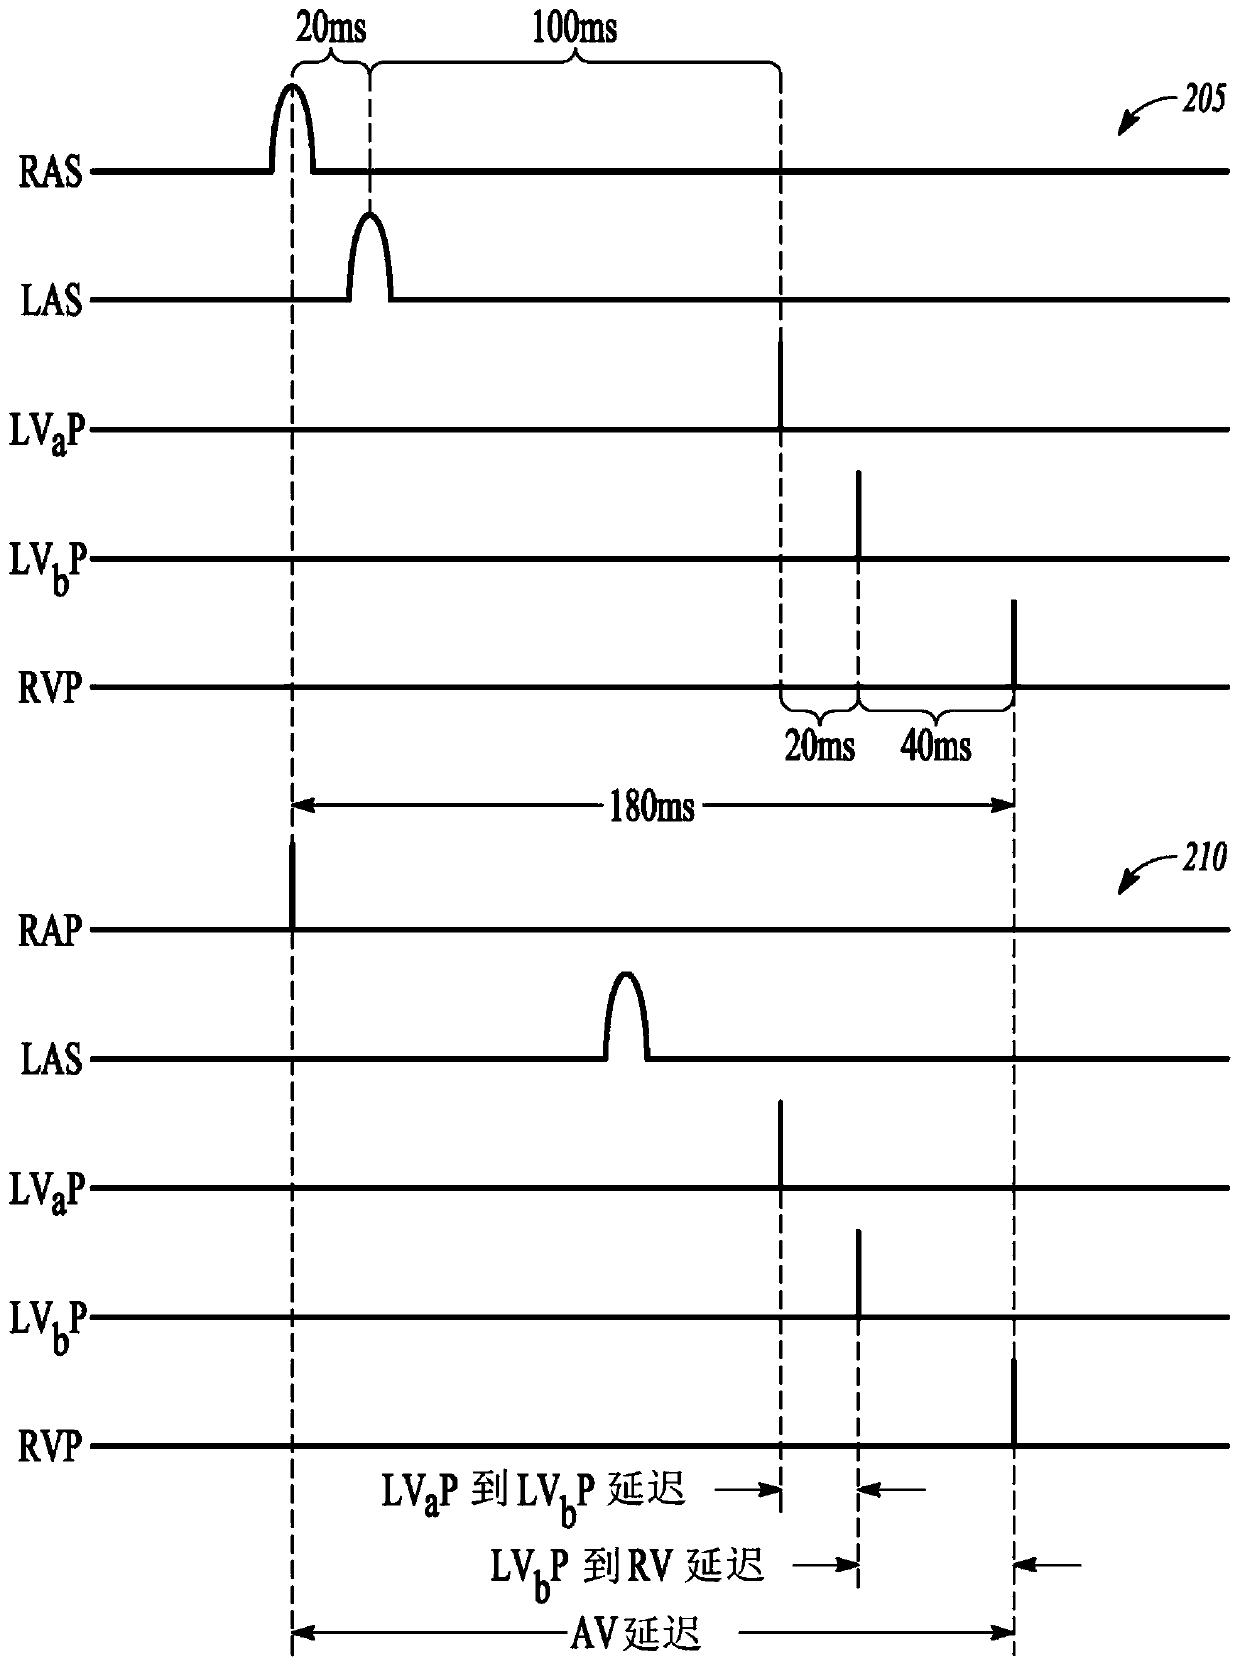 Conduction pathway driven multi-site pacing apparatus